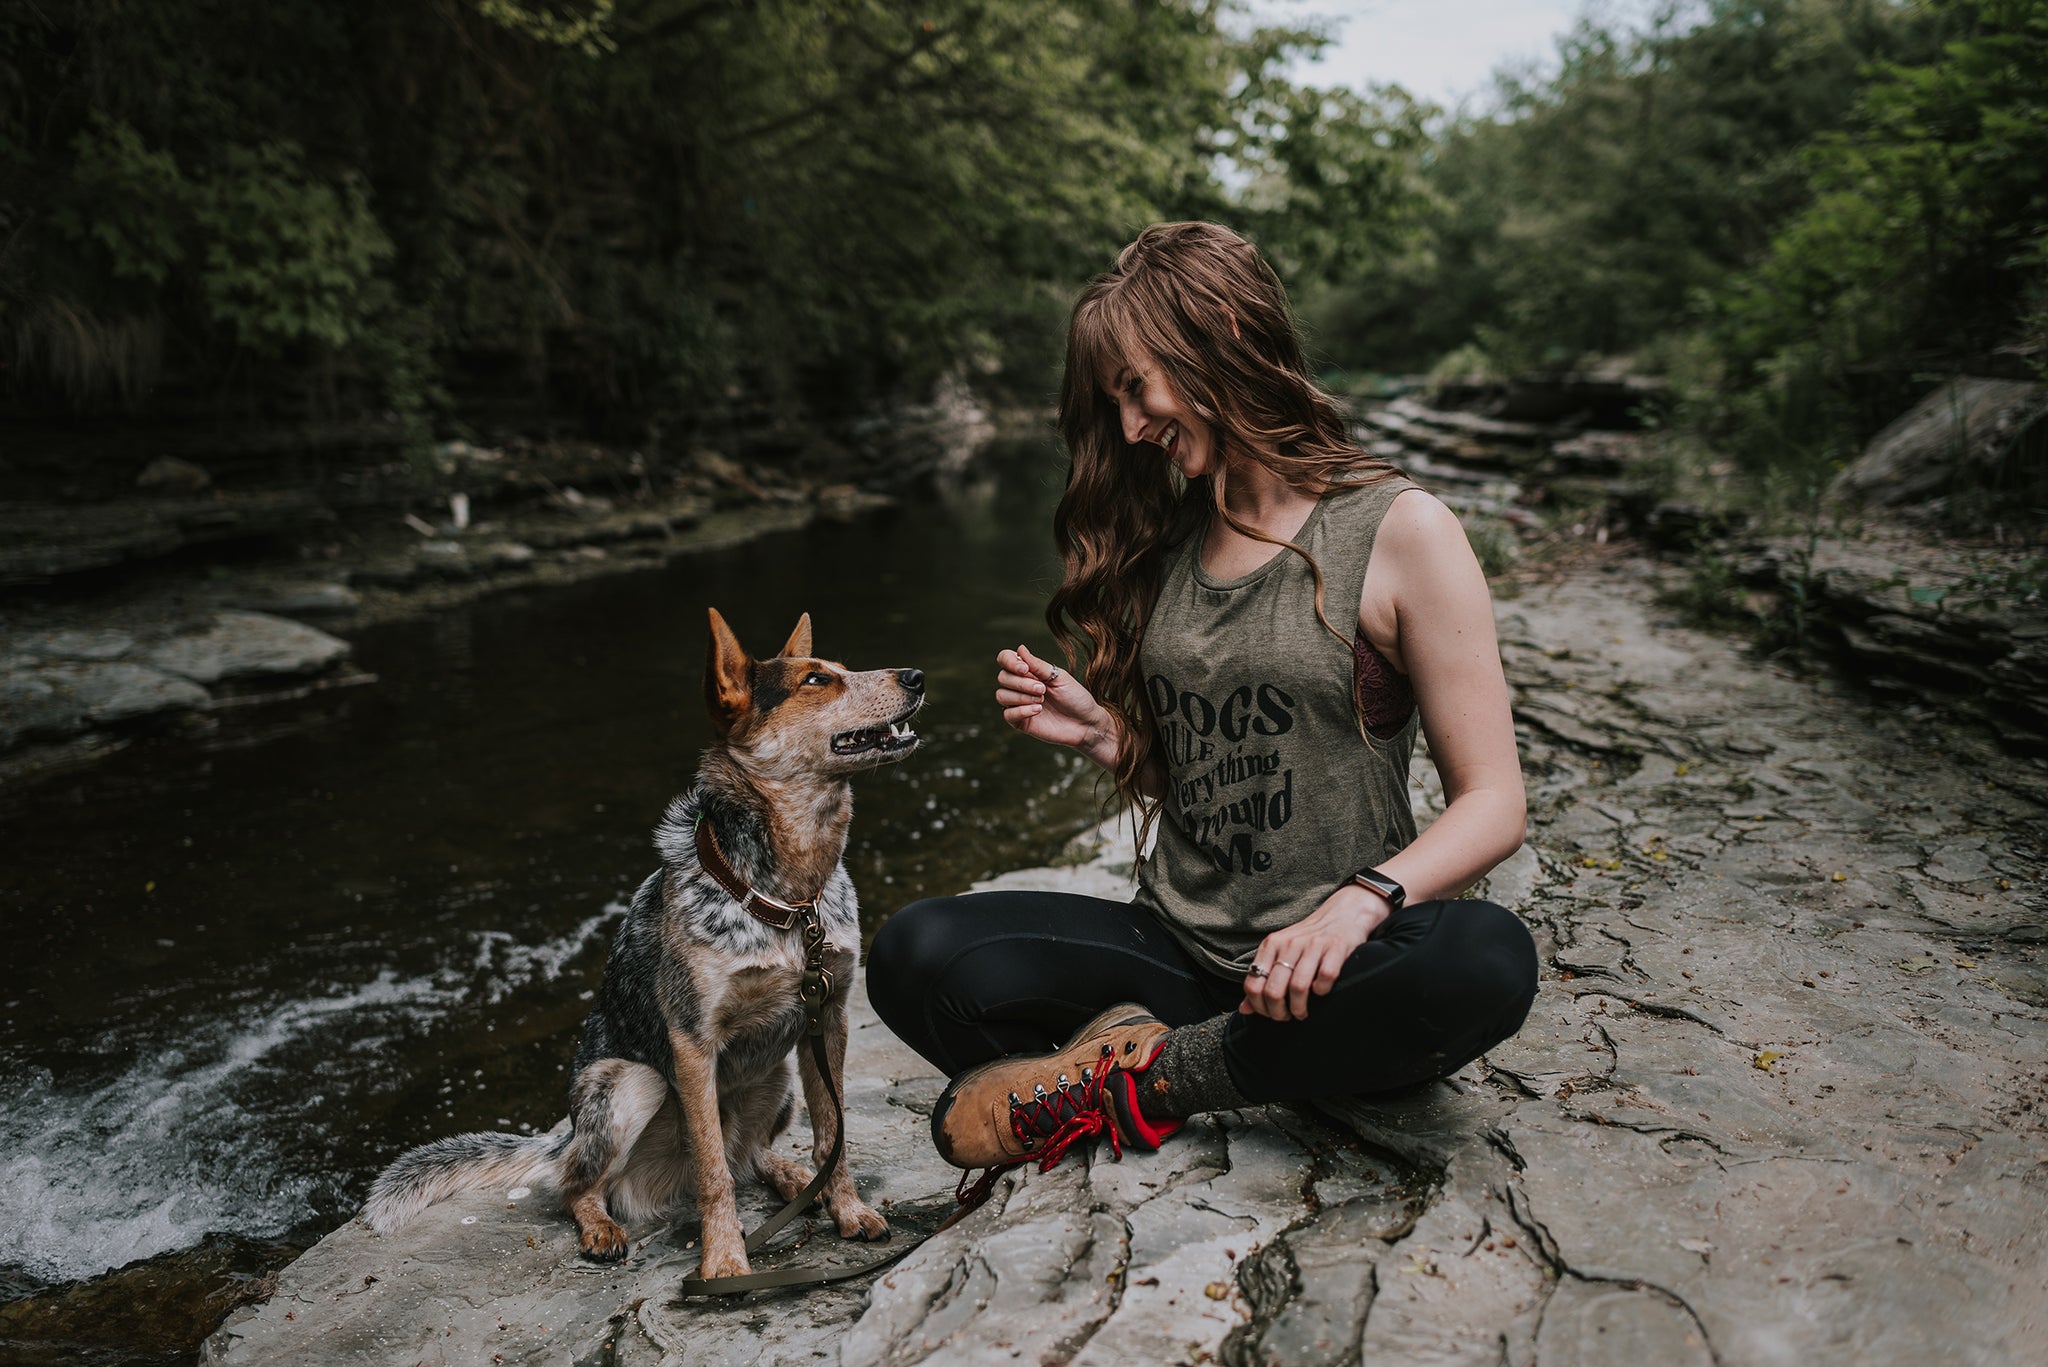 Woman wearing 'Dogs Rule Everything Around Me' tank top sitting next to her dog by a river.